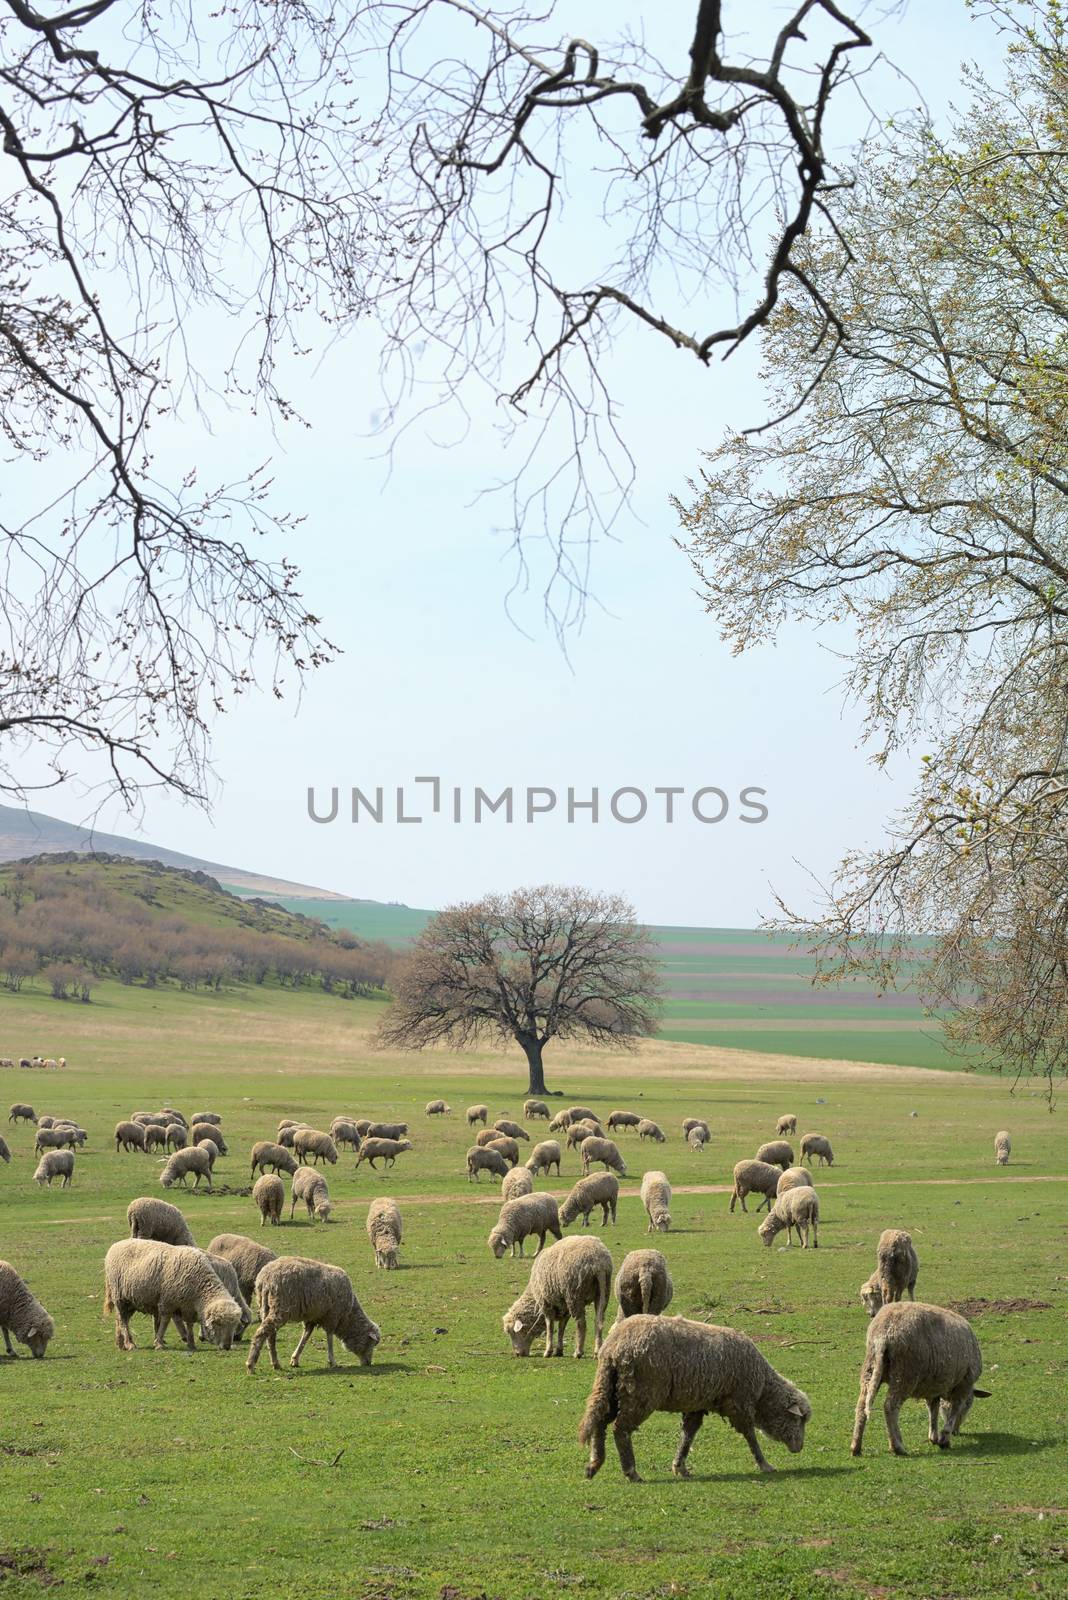 Flock of sheep on field in spring time